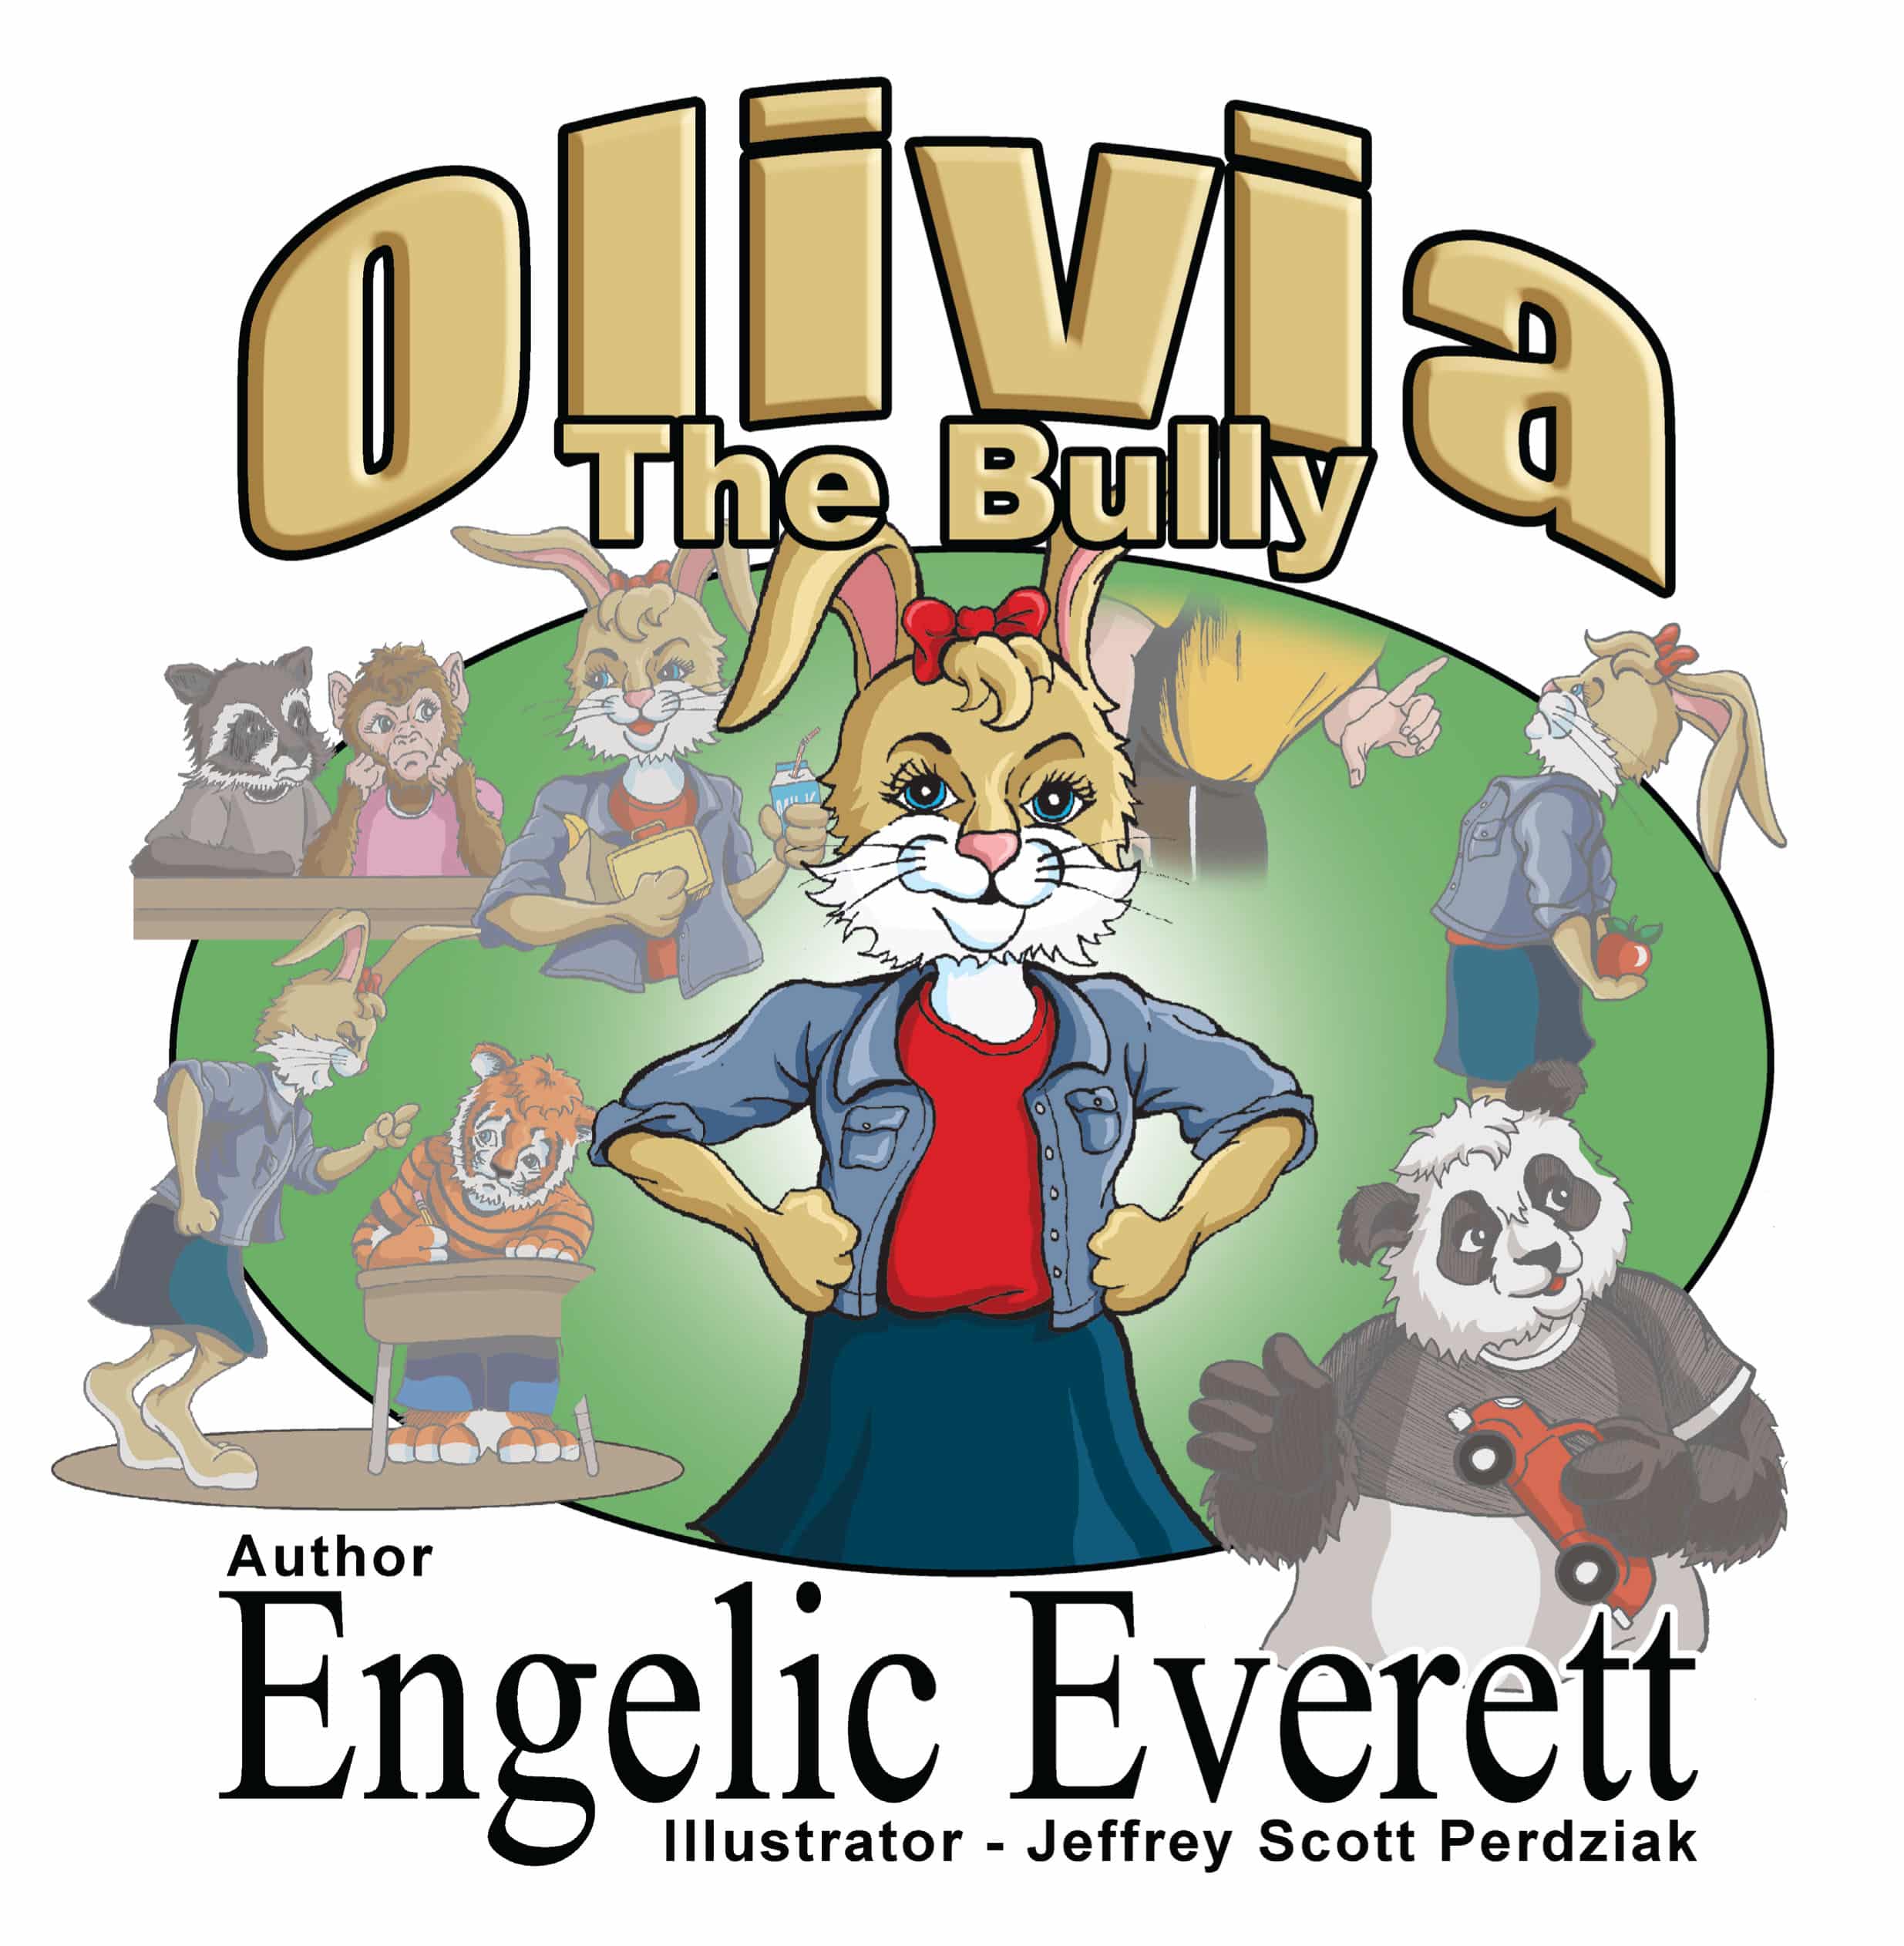 Local Author Writes Important Children’s Book about Bullying